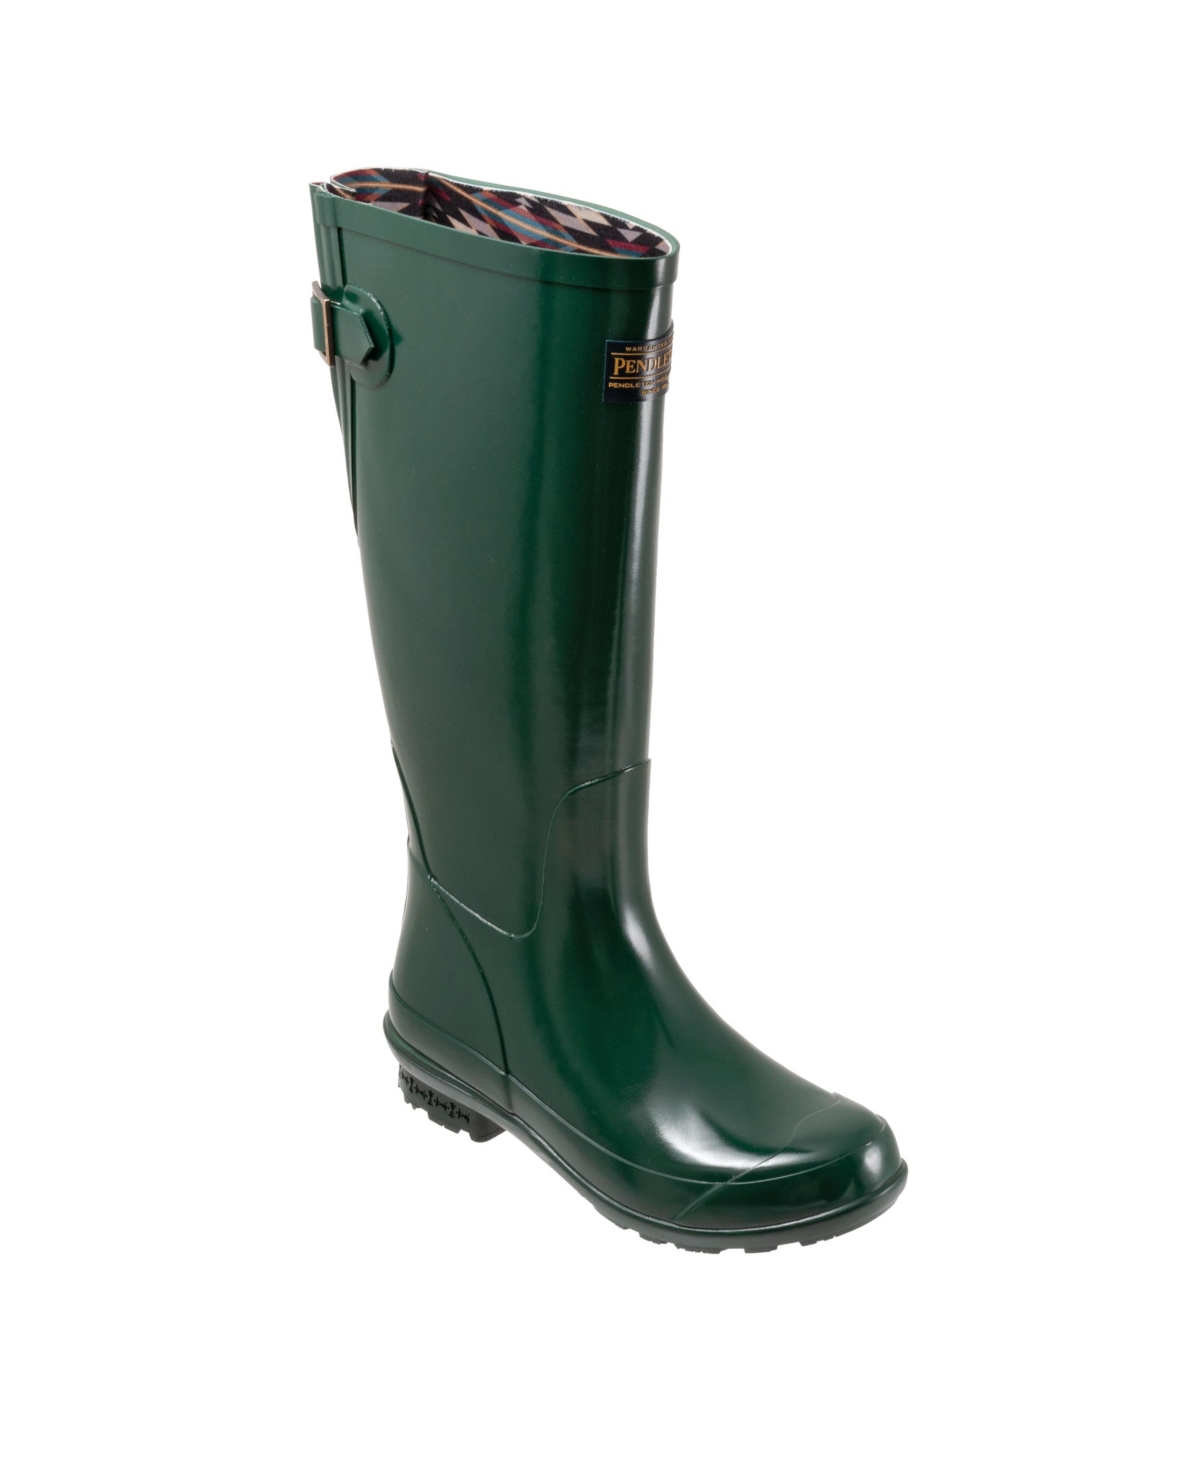 Pendleton Women's Gloss Tall Boots In Green